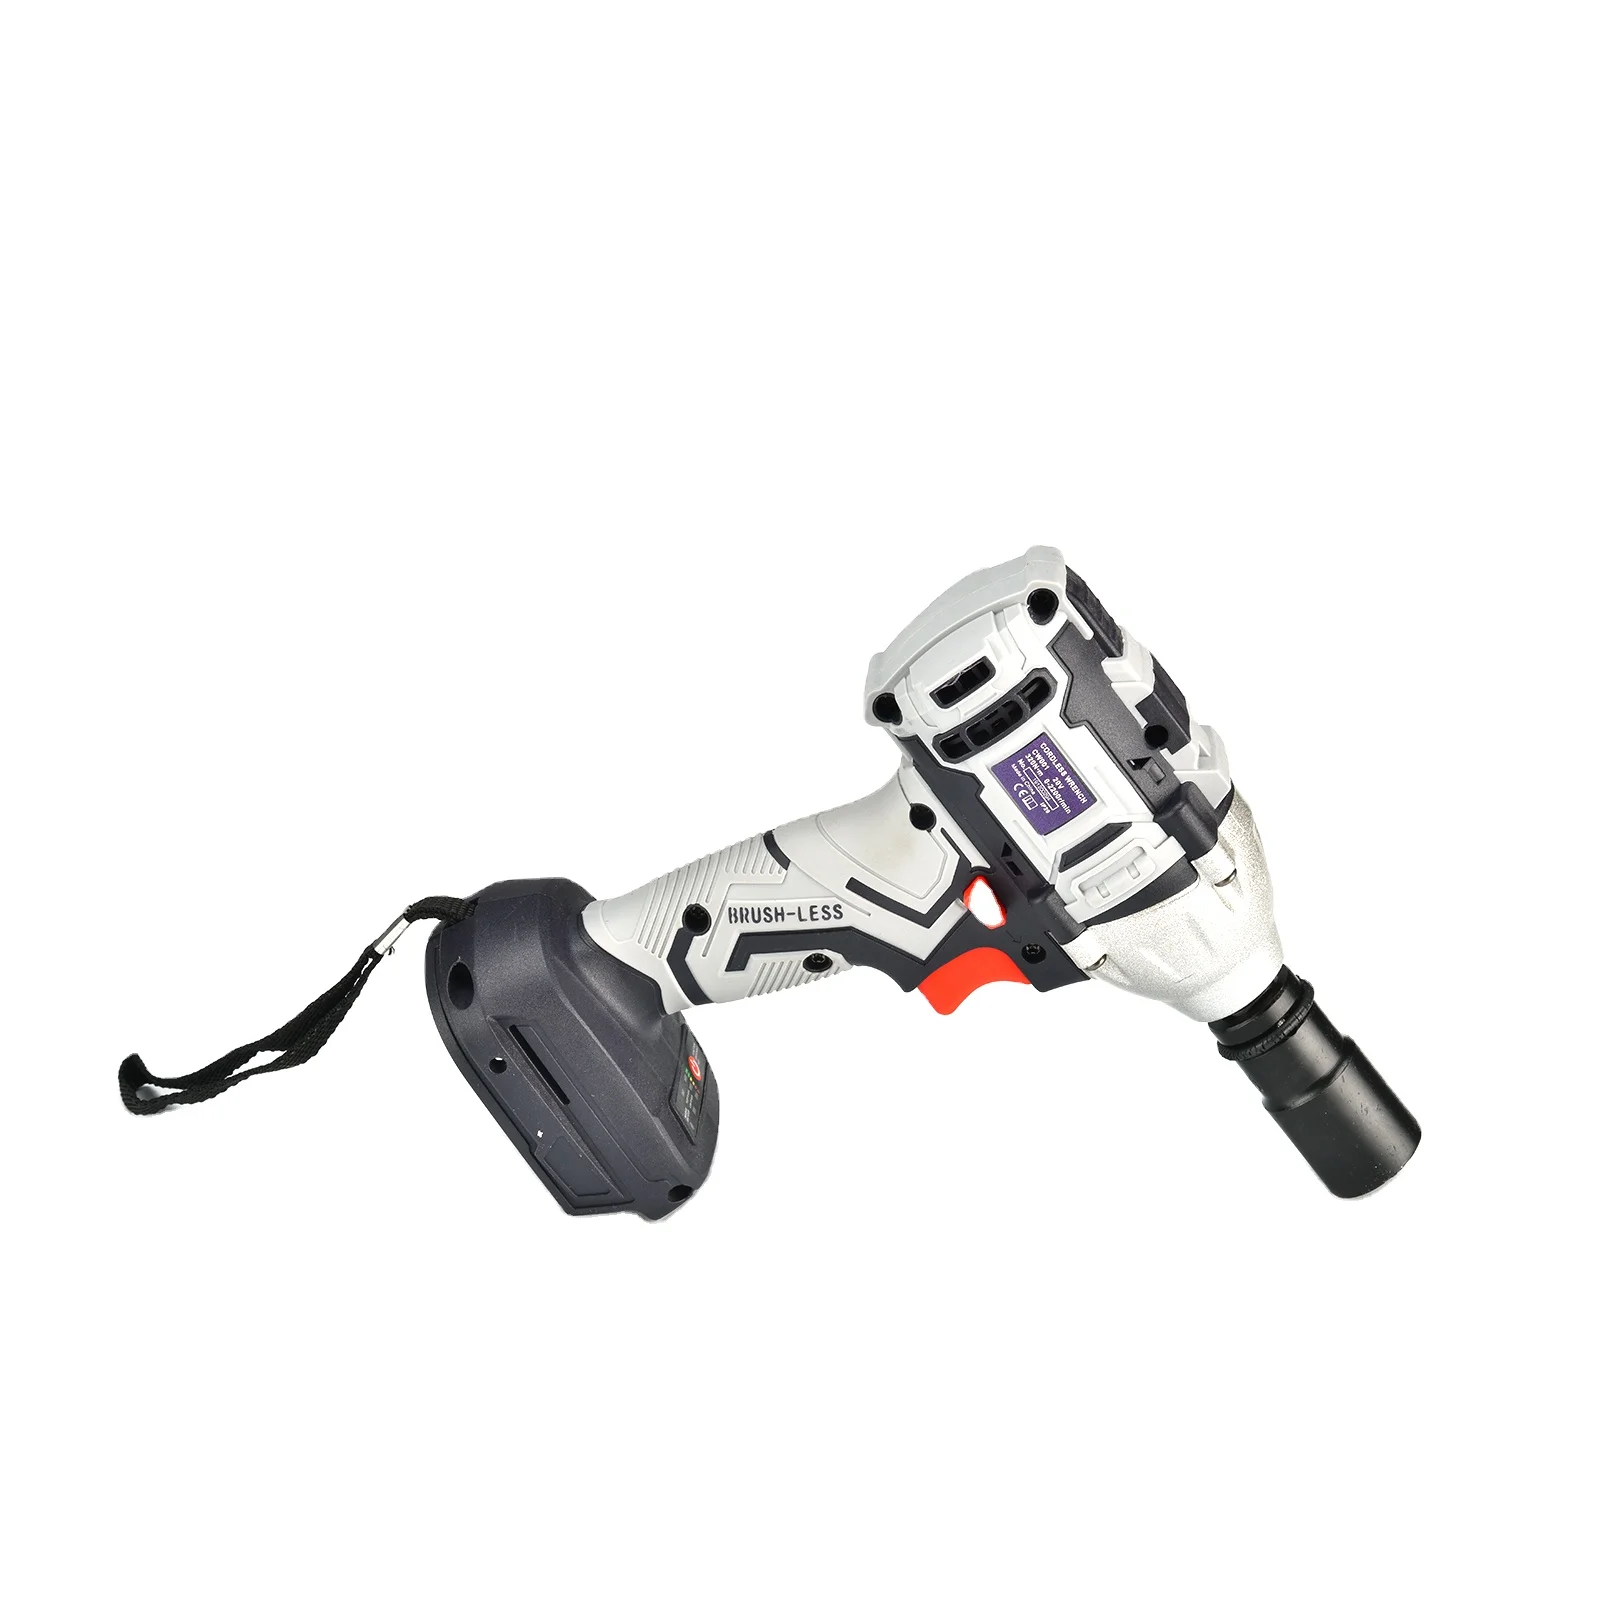 
Impact Power Type 20v Brushes Electric Battery Cordless Wrench CW001  (1600082643525)